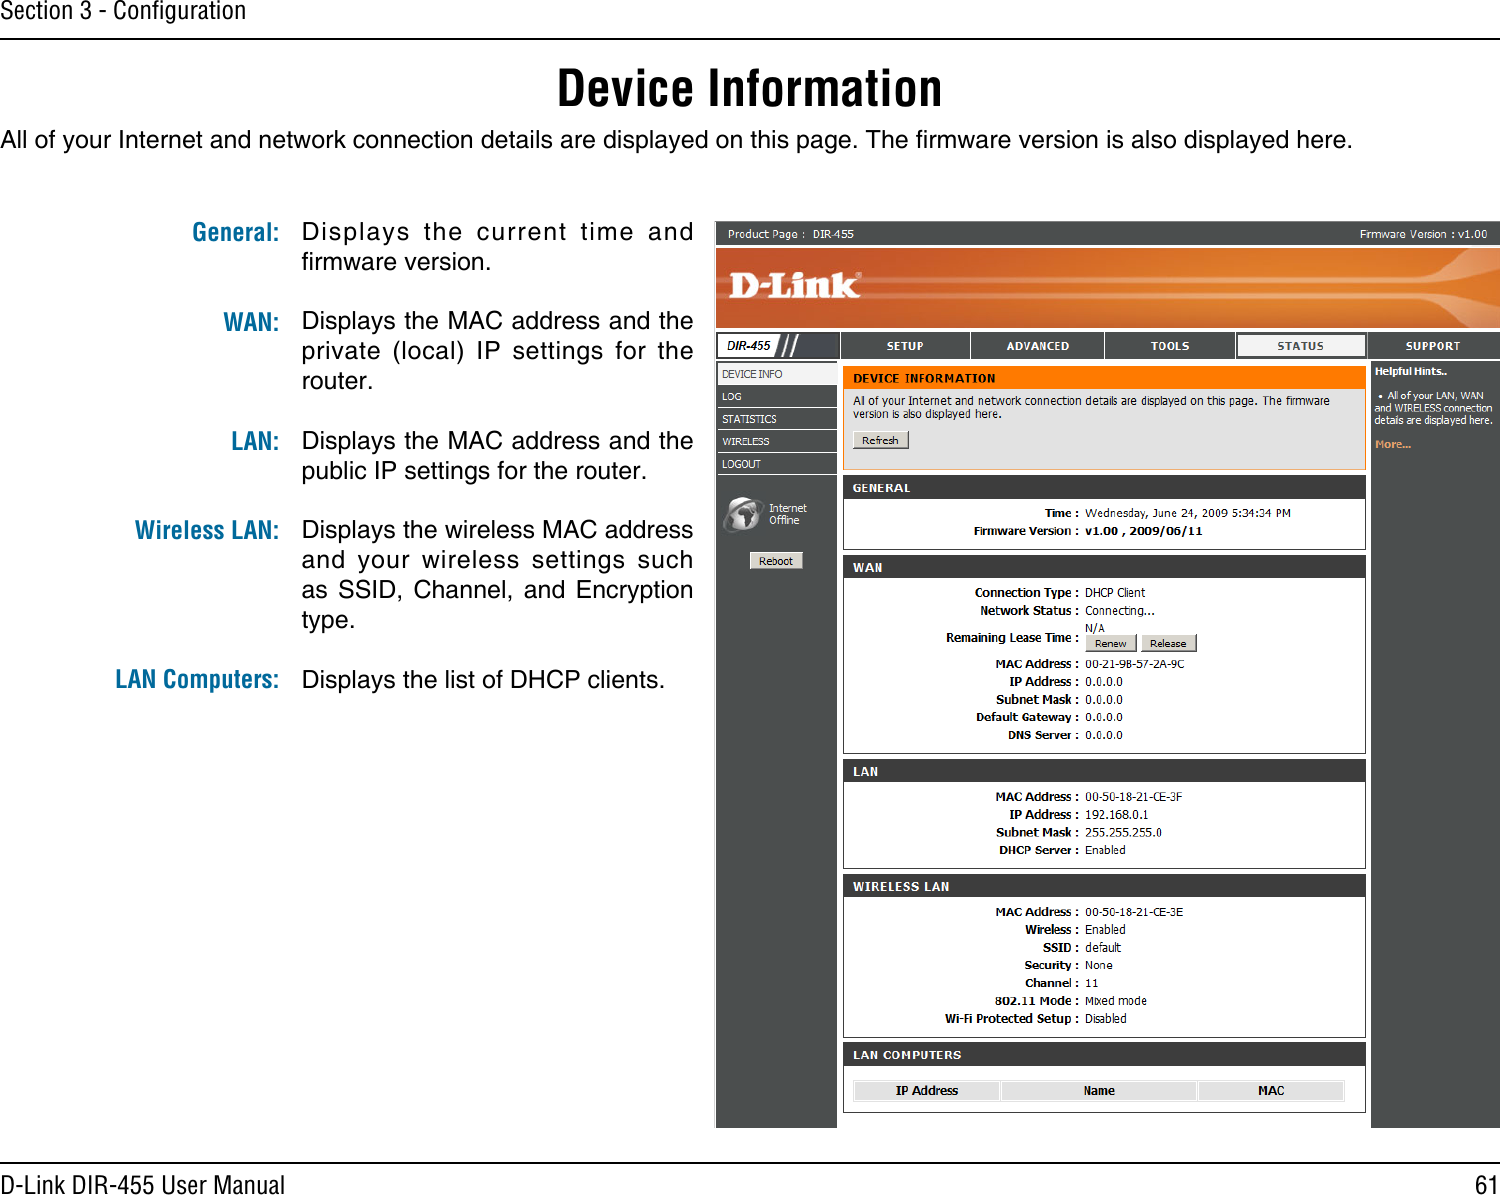 61D-Link DIR-455 User ManualSection 3 - ConﬁgurationDevice InformationAll of your Internet and network connection details are displayed on this page. The rmware version is also displayed here. Displays  the  current  time  and rmware version.Displays the MAC address and the private  (local)  IP  settings  for  the router.Displays the MAC address and the public IP settings for the router.Displays the wireless MAC address and  your  wireless  settings  such as  SSID,  Channel,  and  Encryption type.Displays the list of DHCP clients.General: WAN:LAN: Wireless LAN: LAN Computers: